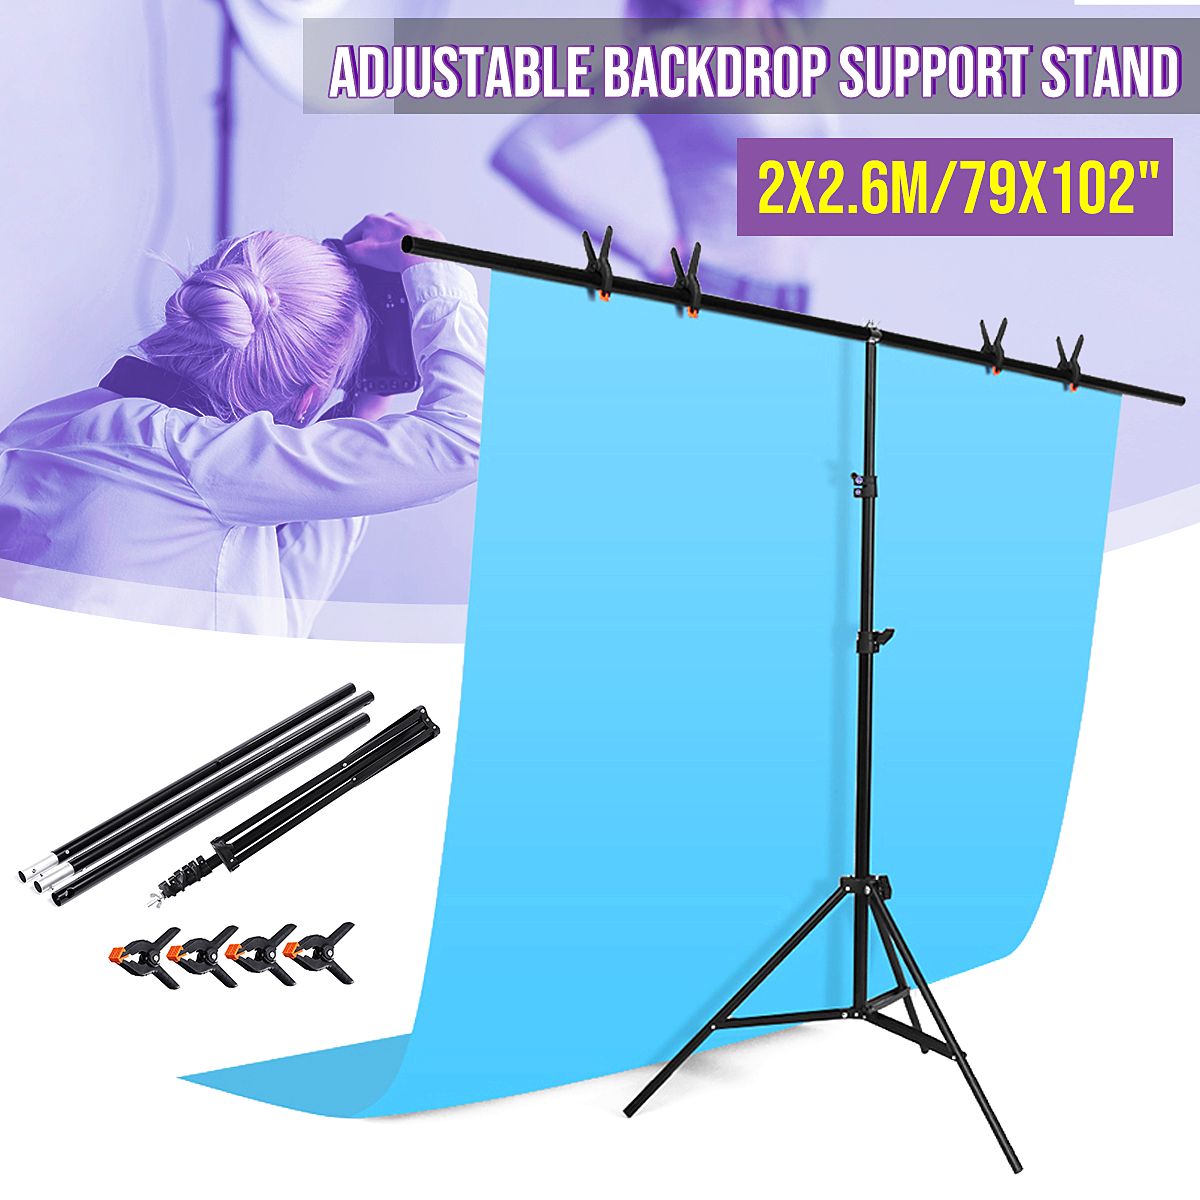 2x26m-Small-Portable-T-type-Adjustable-Background-Support-Stand-Holder-Backdrop-Photography-1759956